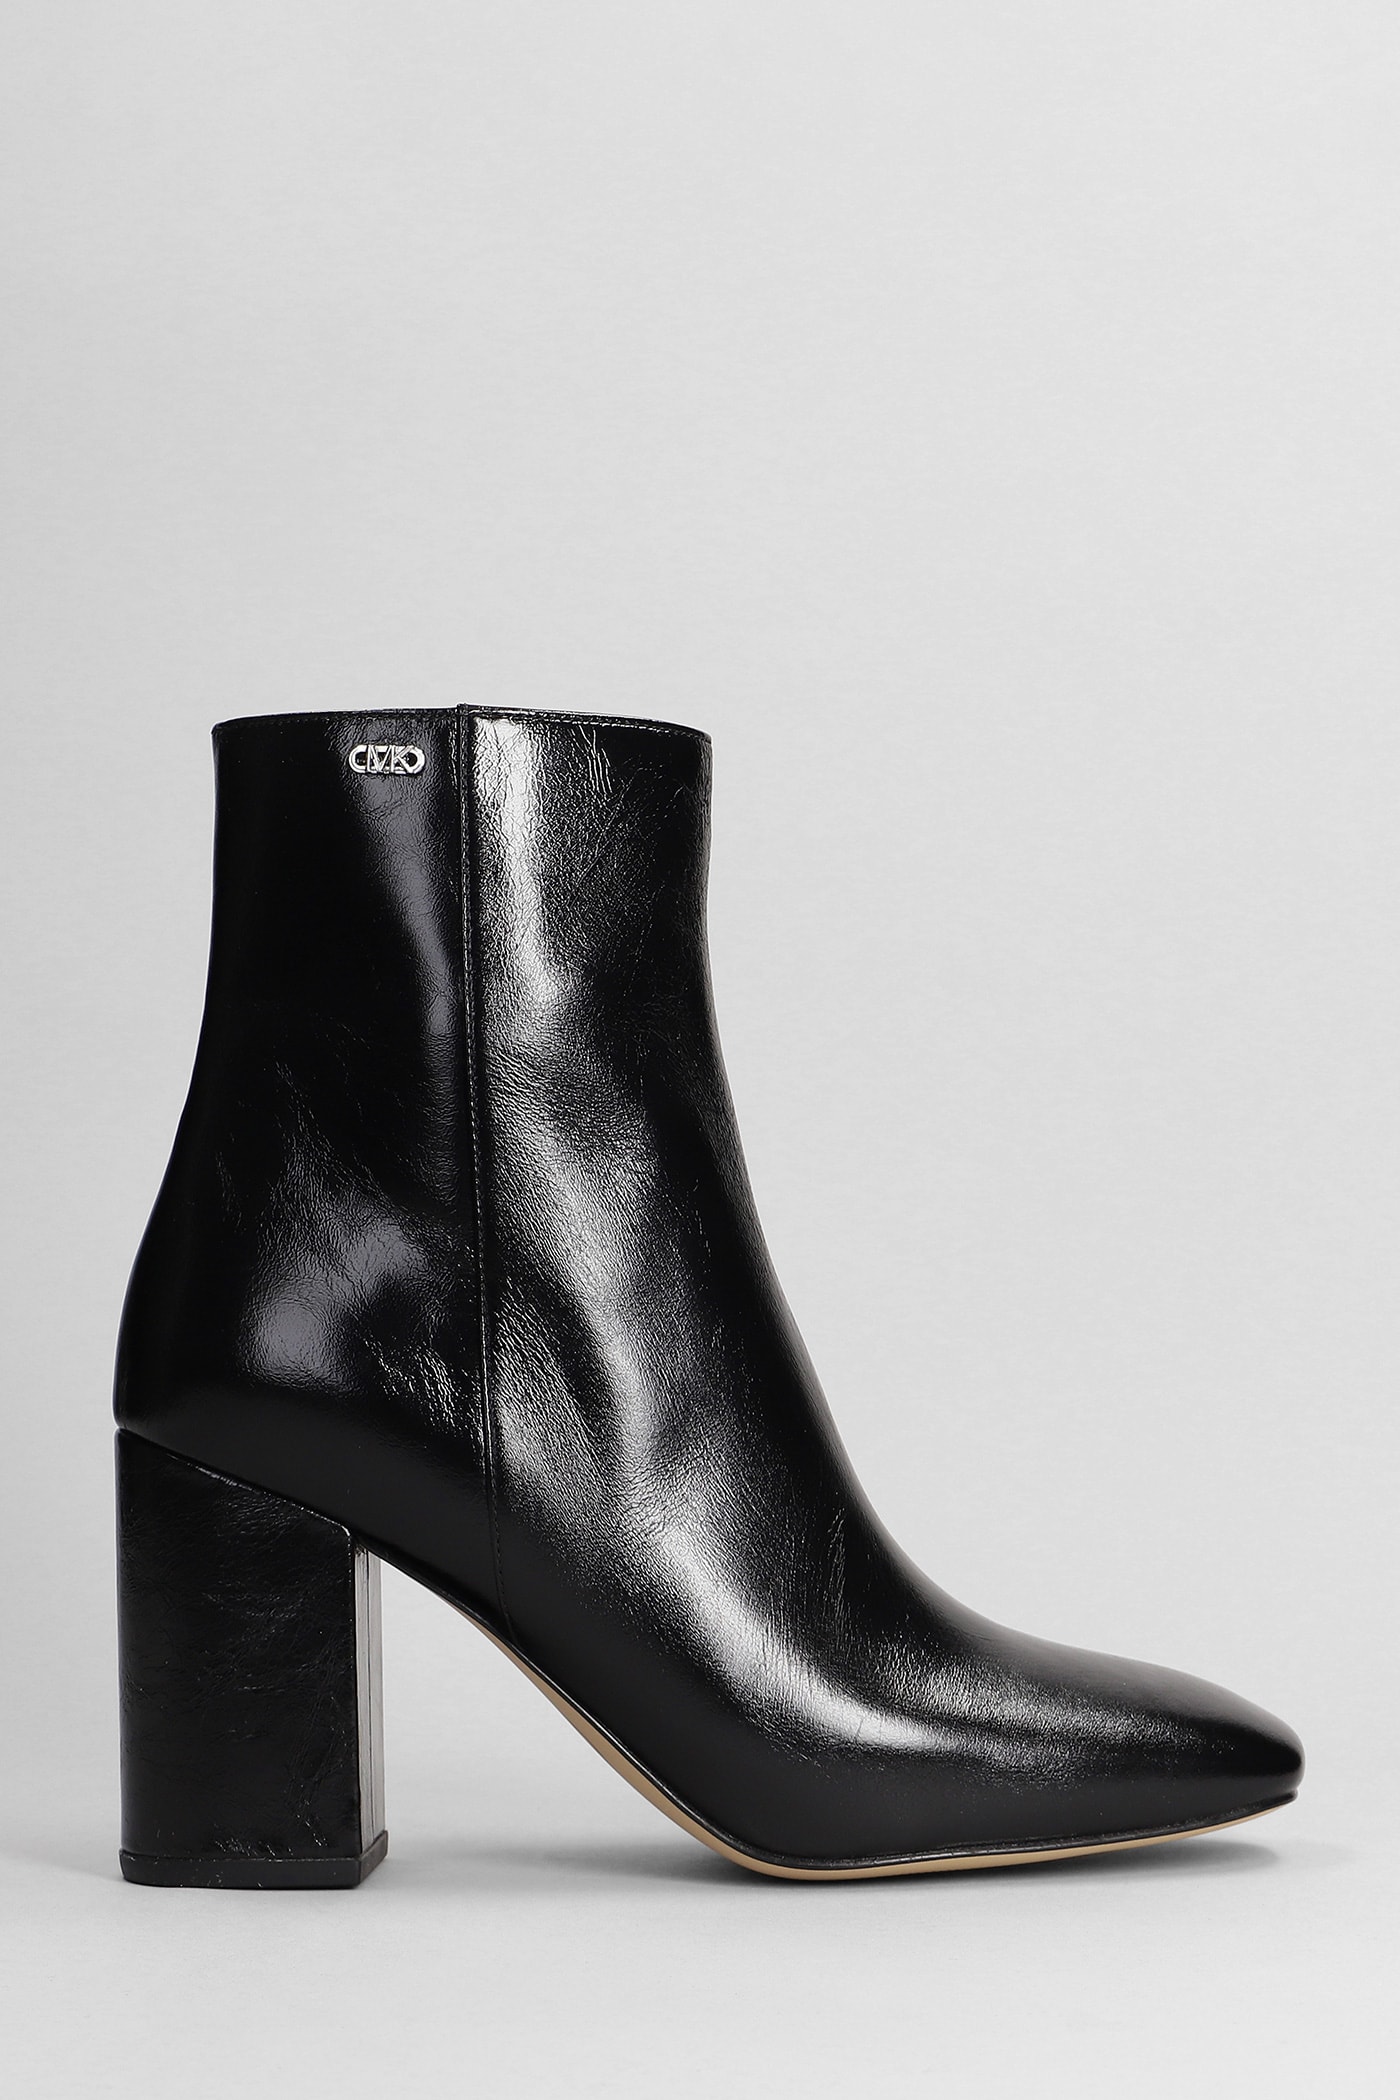 MICHAEL MICHAEL KORS PERLA HIGH HEELS ANKLE BOOTS IN BLACK LEATHER